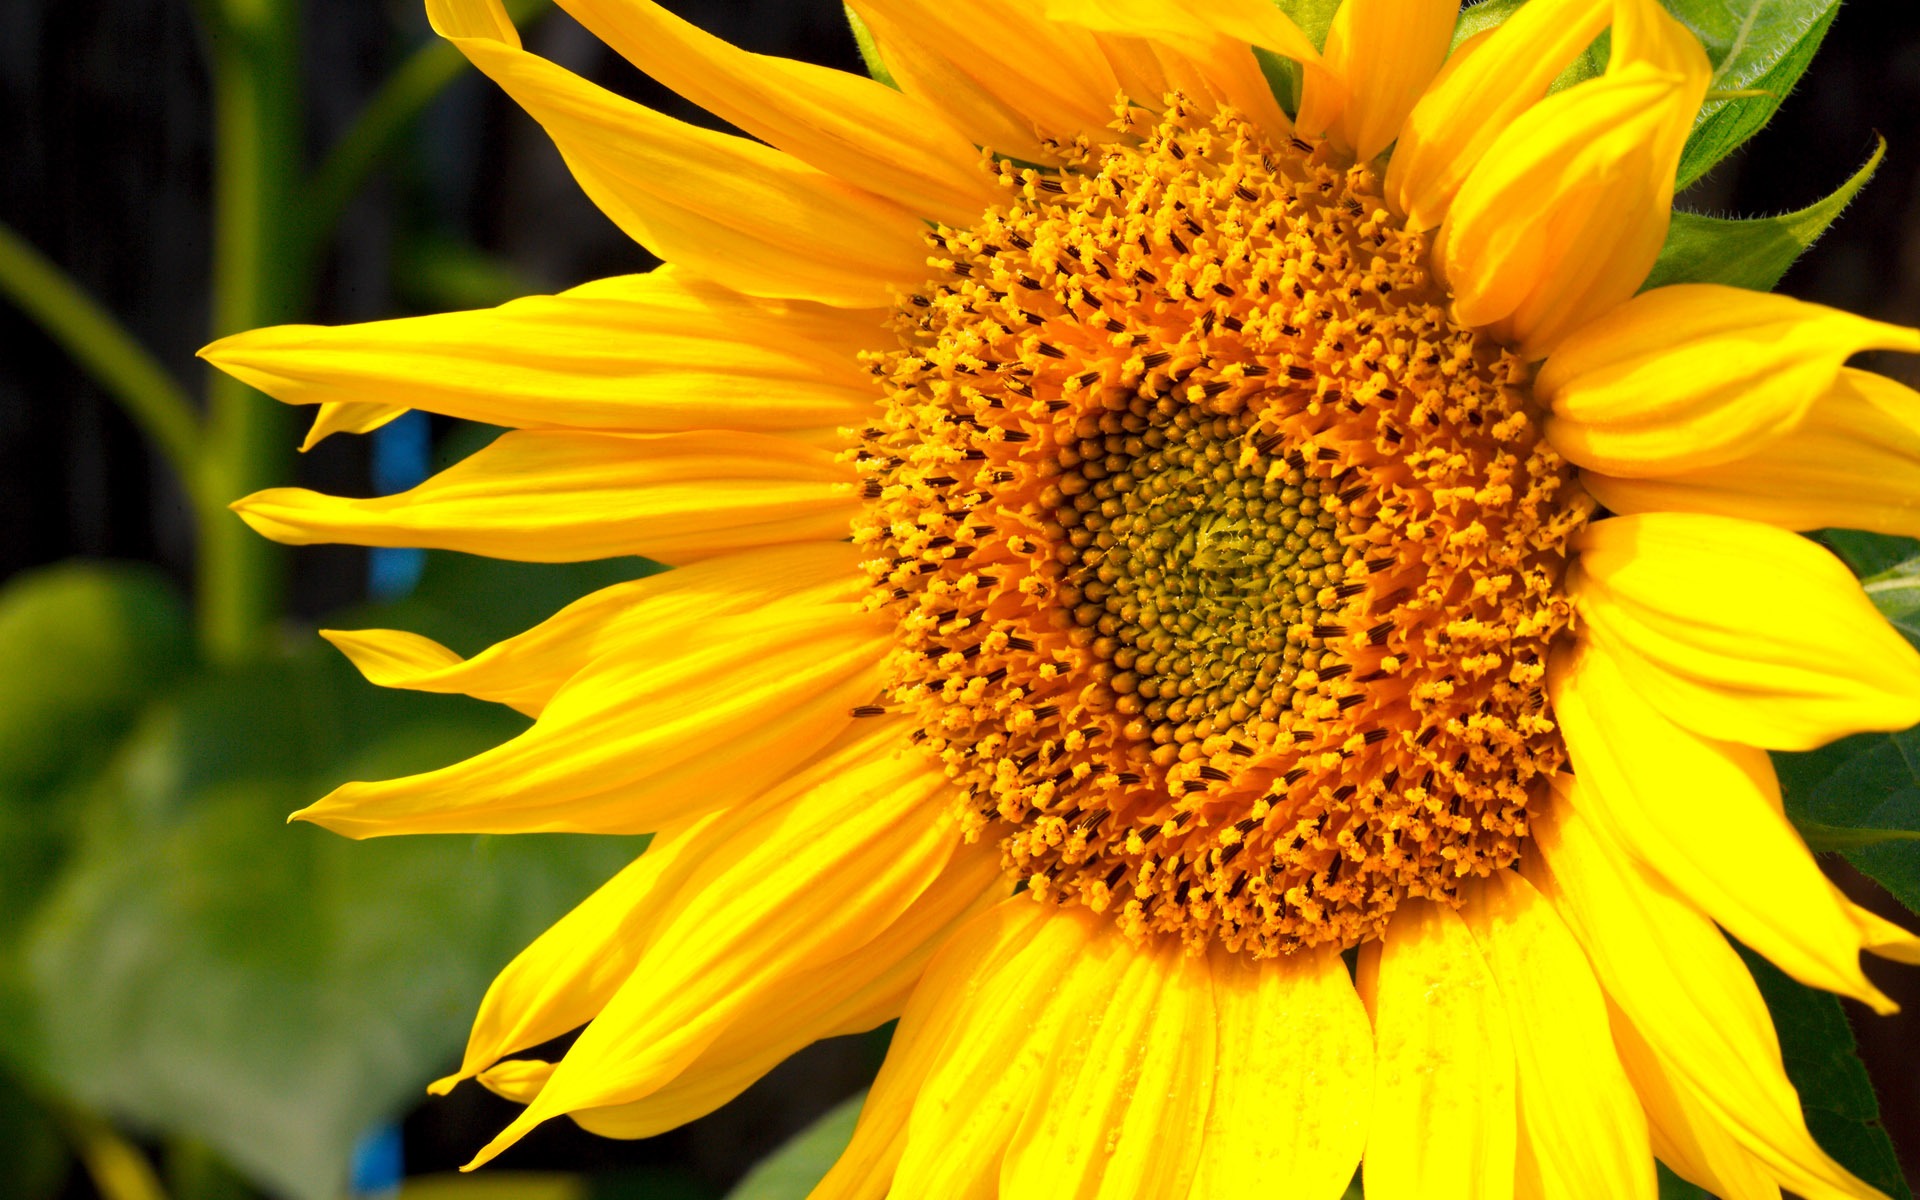 Sunny sunflower photo HD Wallpapers #37 - 1920x1200